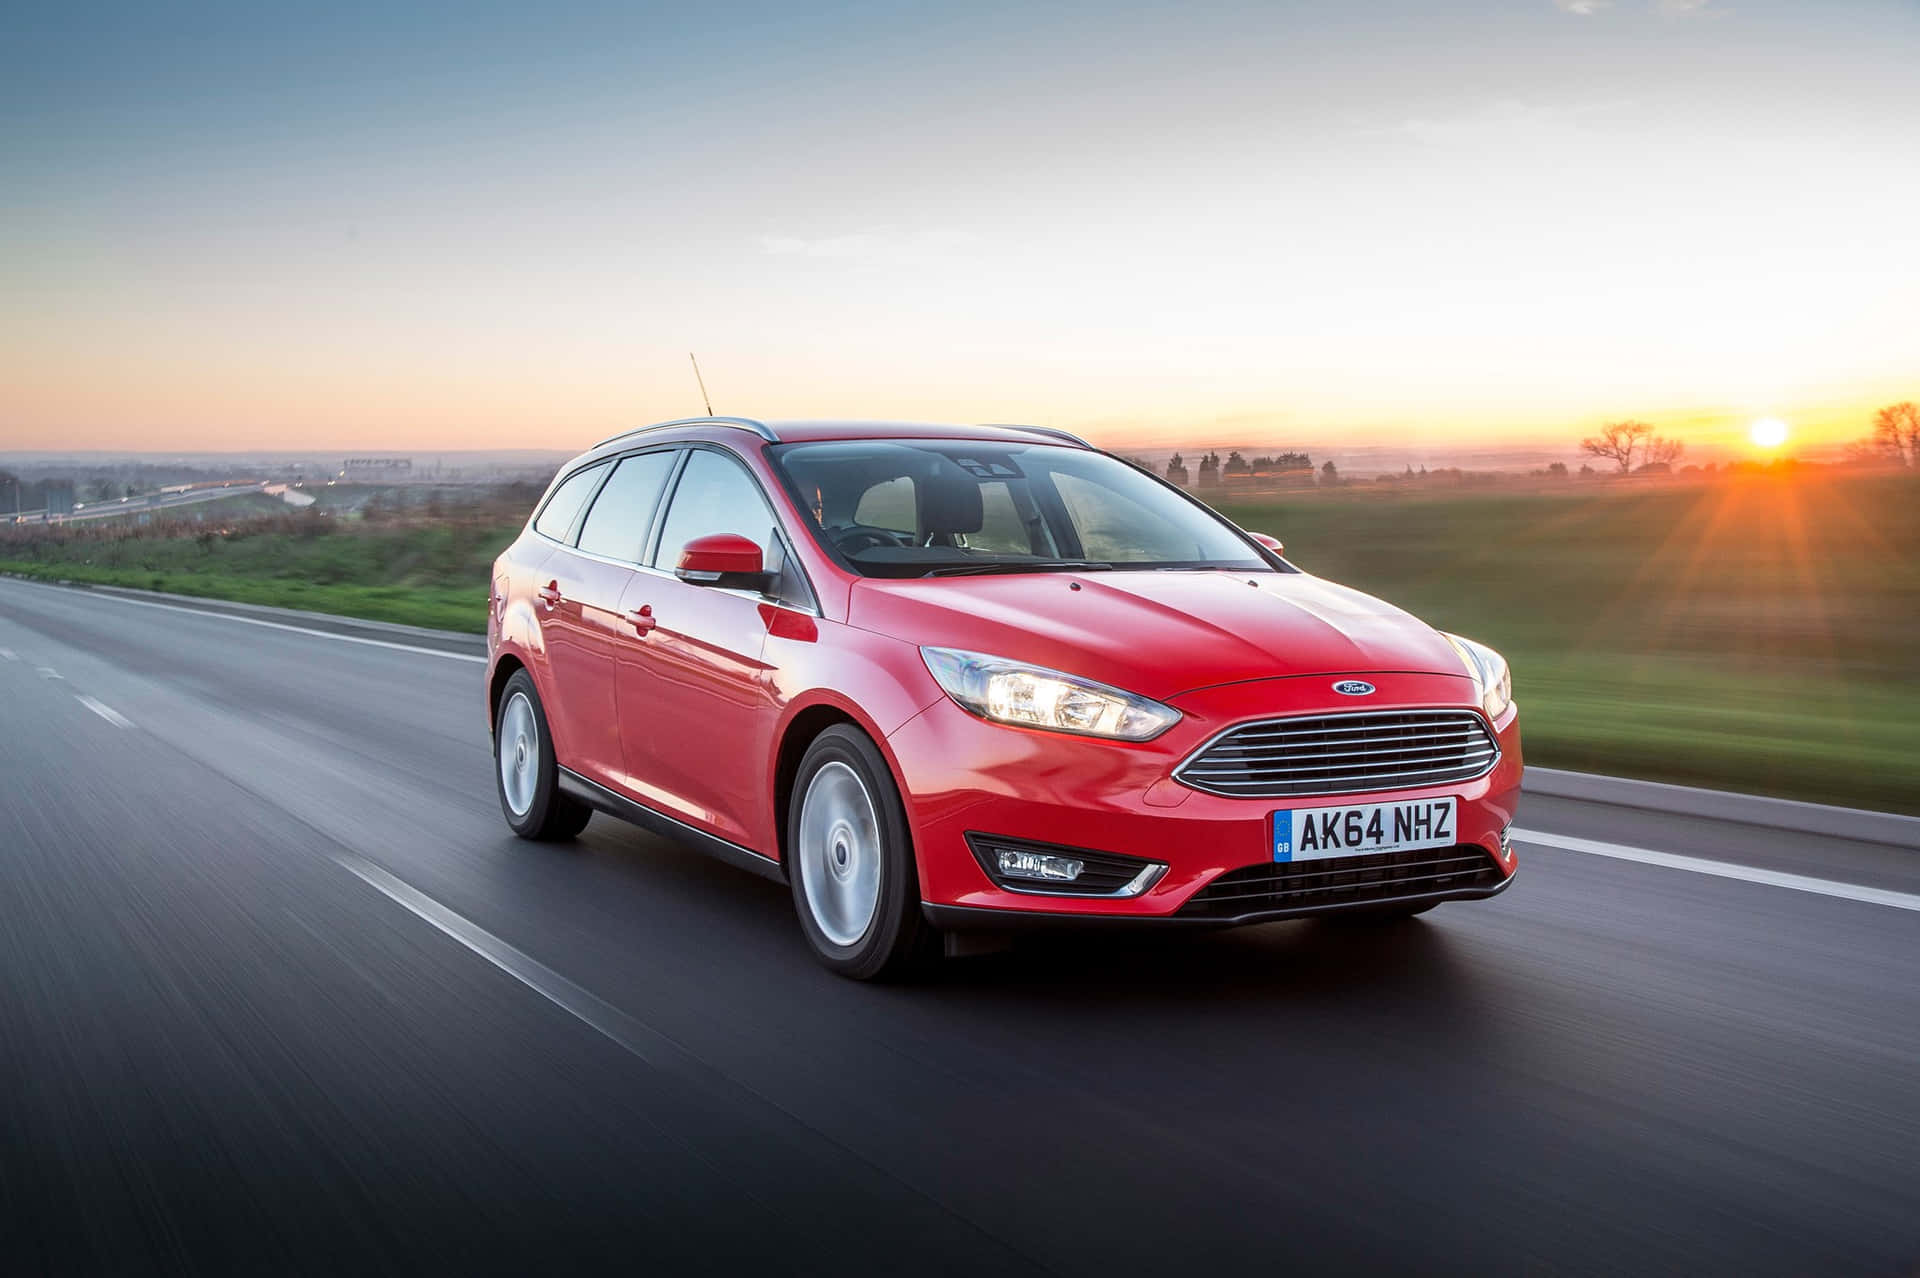 Sleek Ford Focus in motion on a stunning road Wallpaper